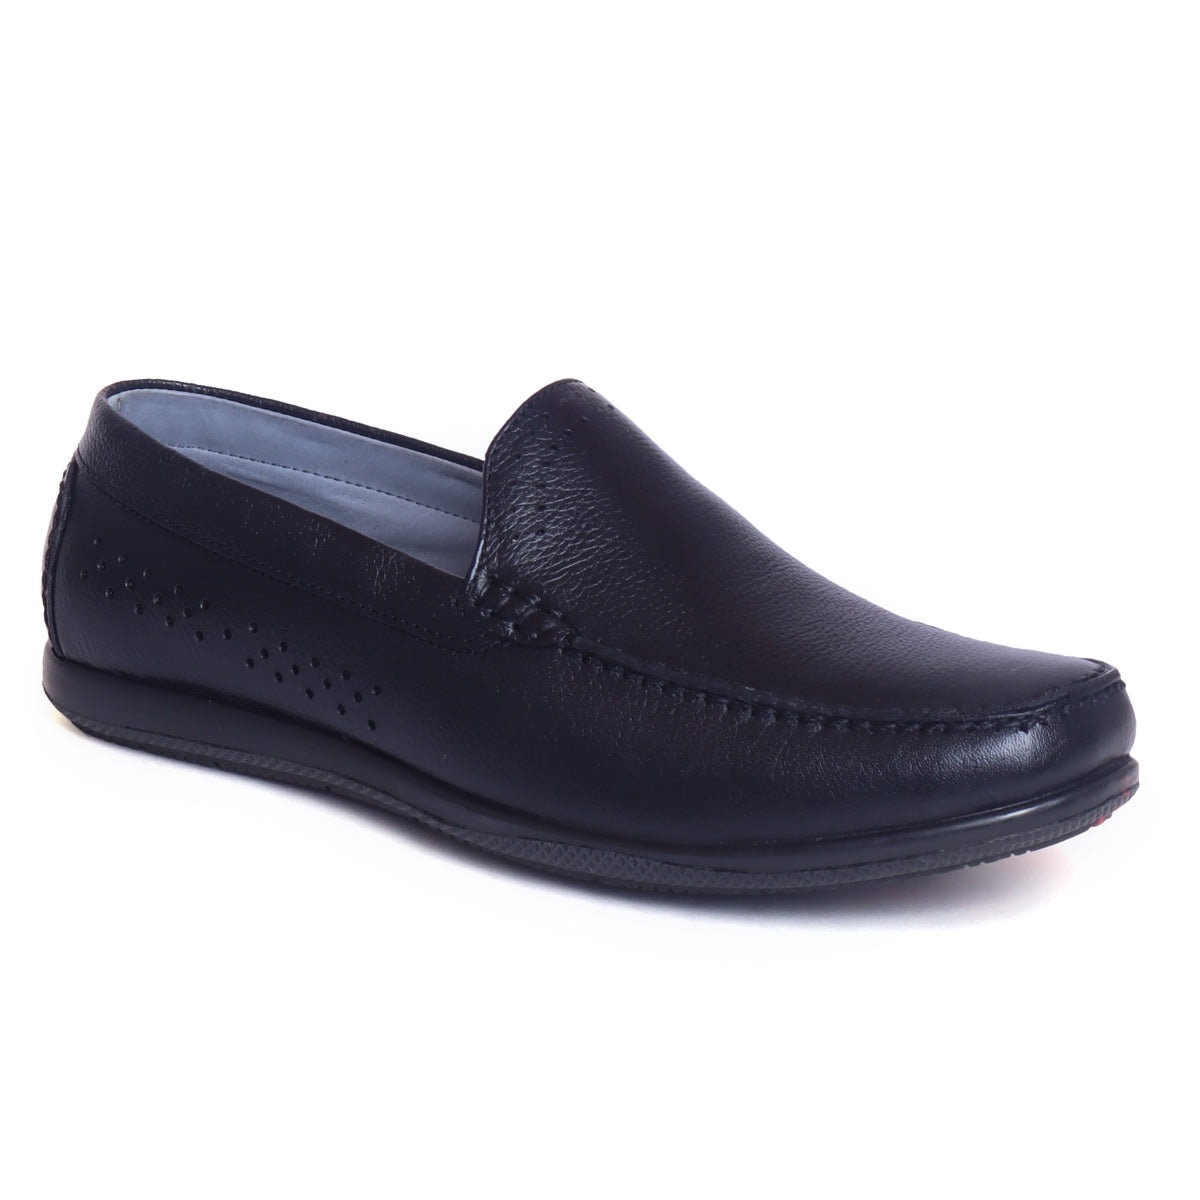 leather loafers for men_ZS6